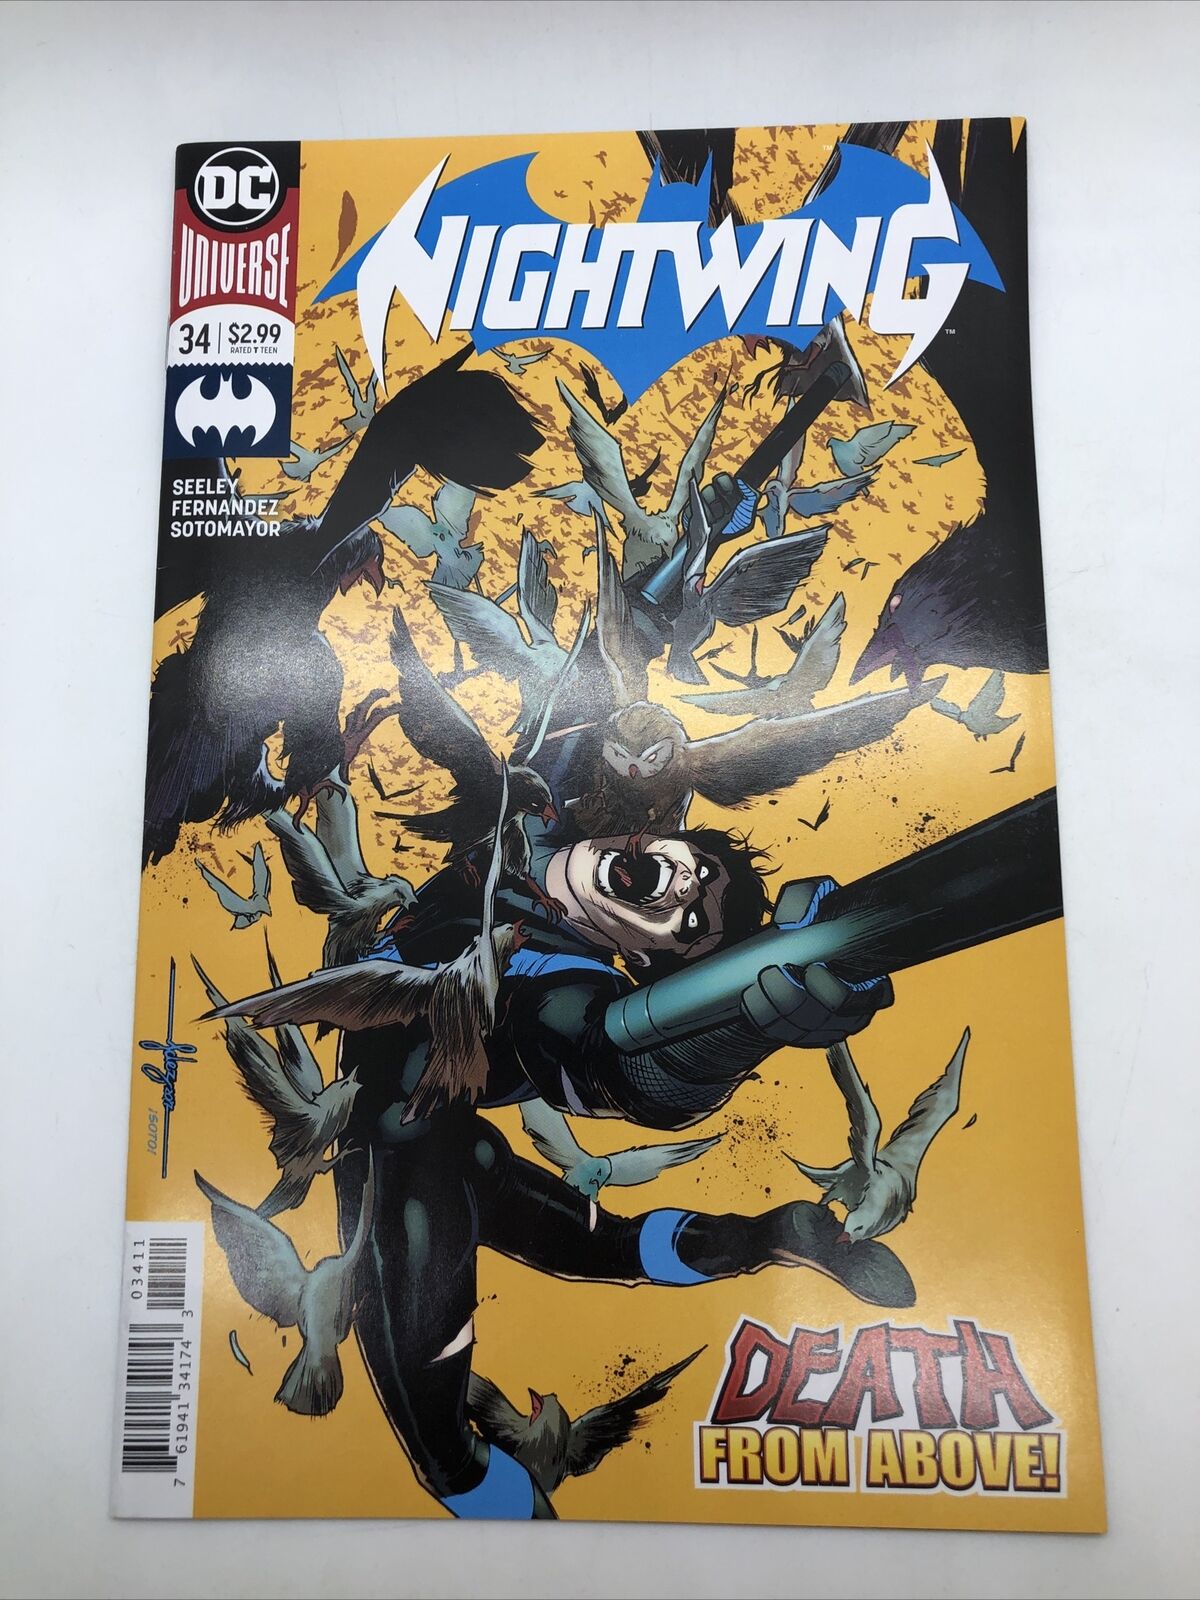 Nightwing # 34 Cover 1 (DC, 2018) 1st Print              